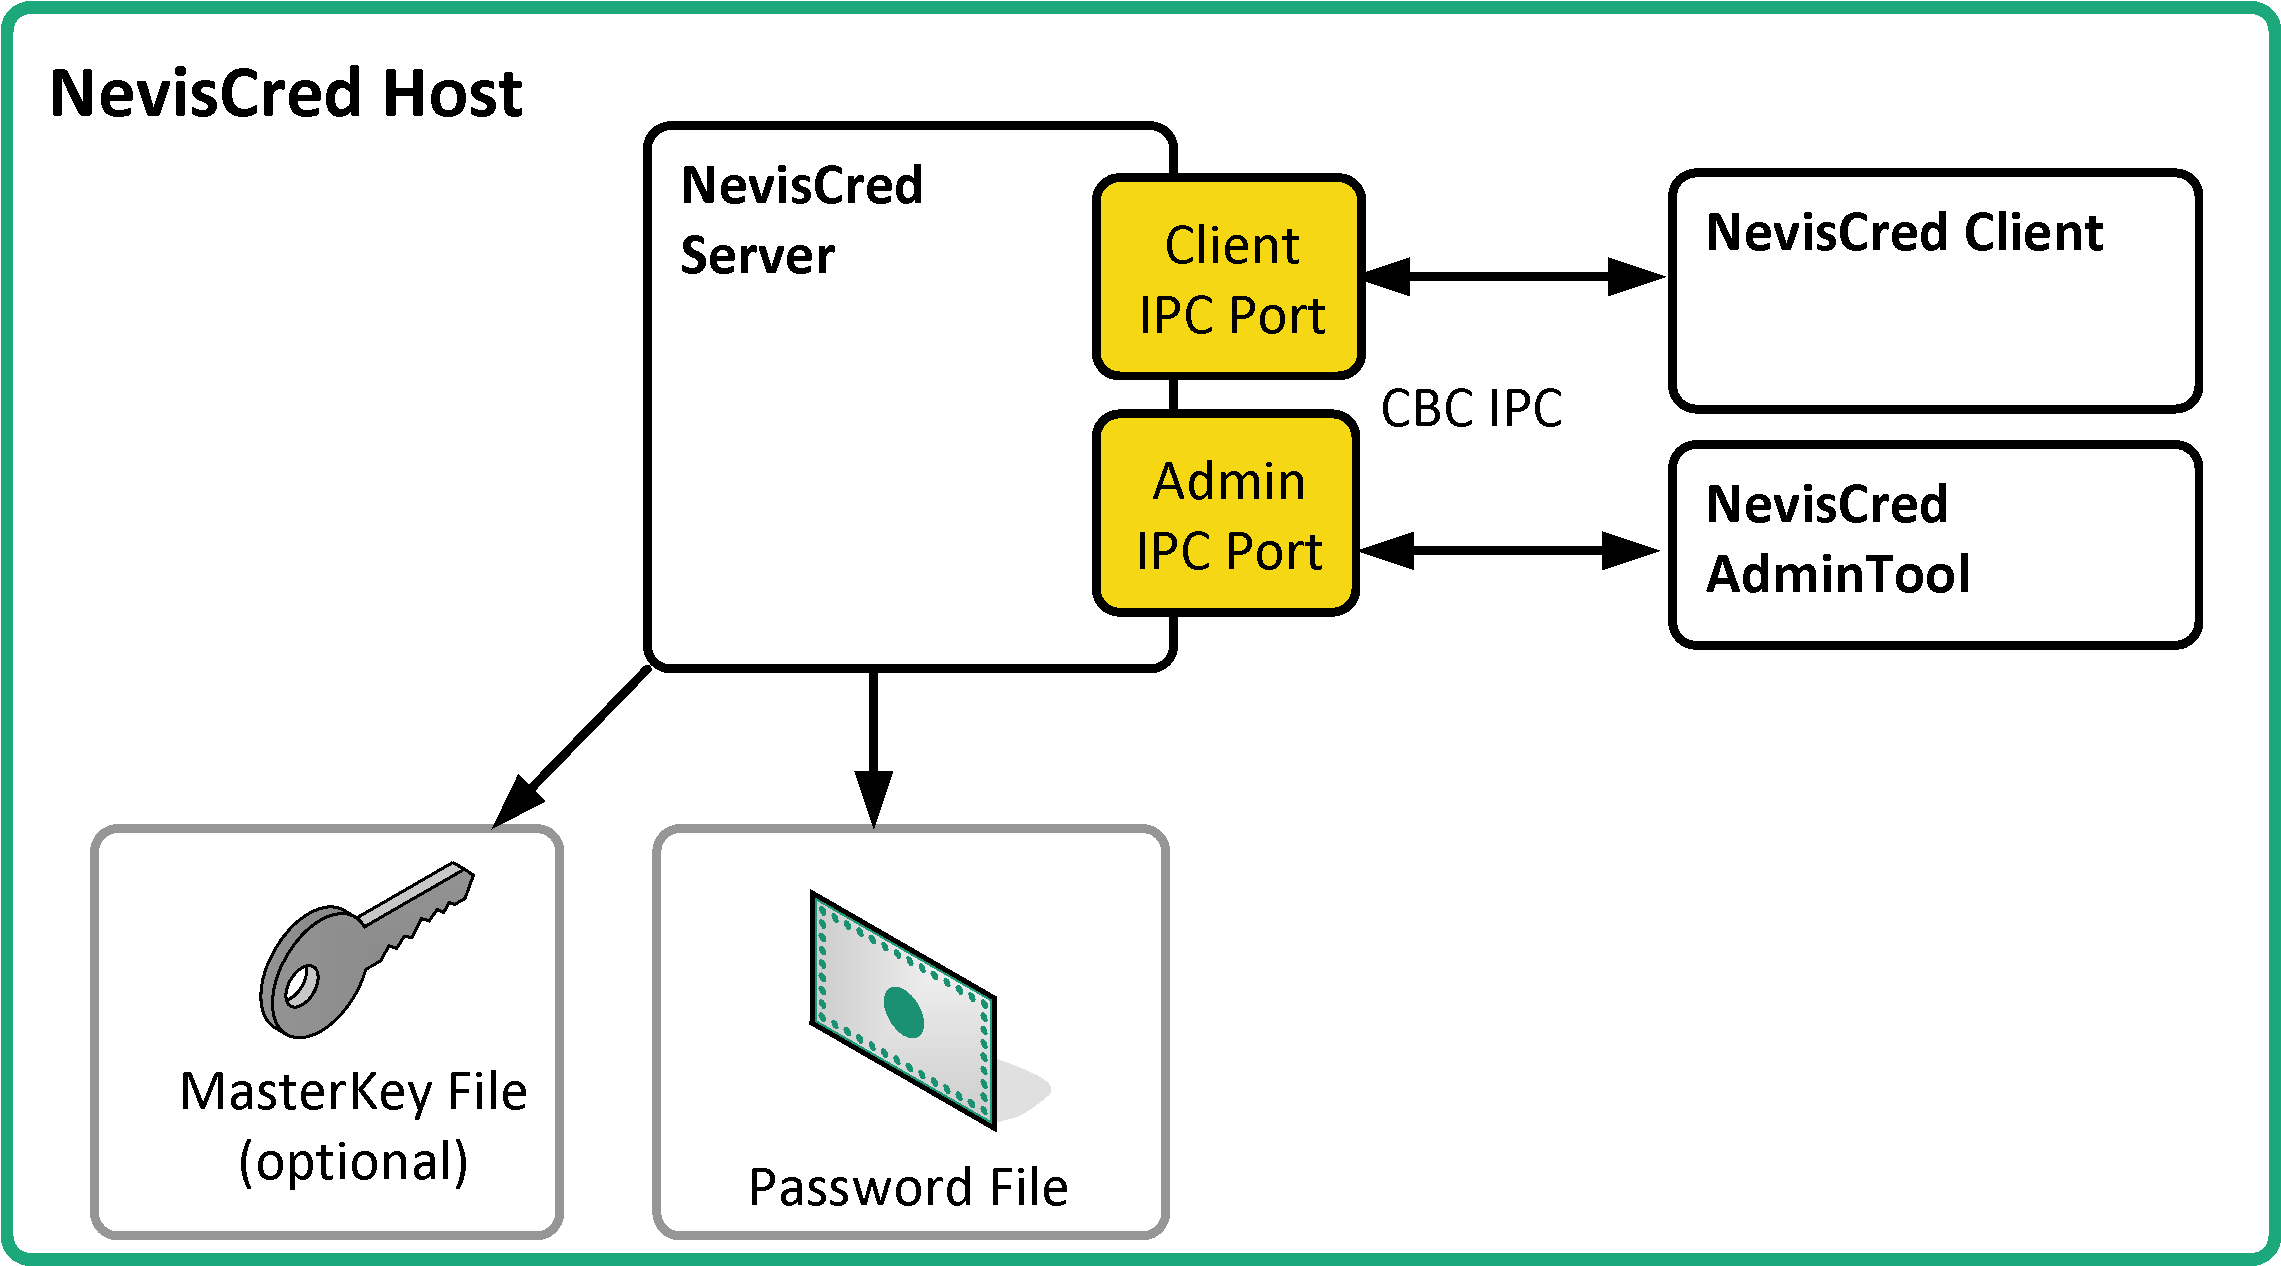 nevisCred components